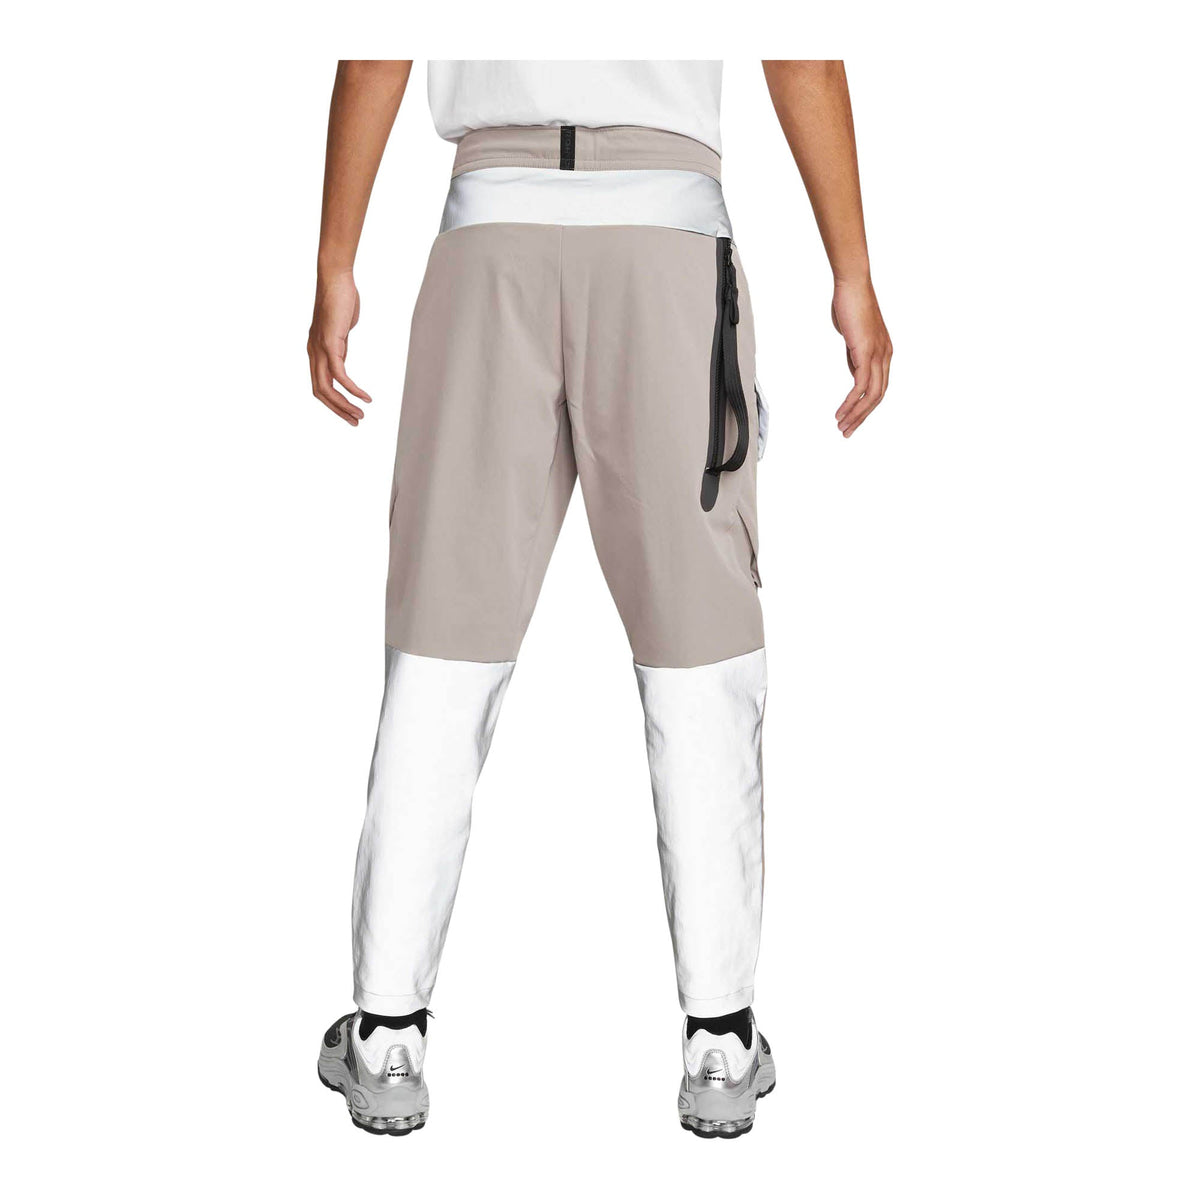 nike flyknit manufacturing list in hindi full Men's Reflective Unlined Cargo Pants